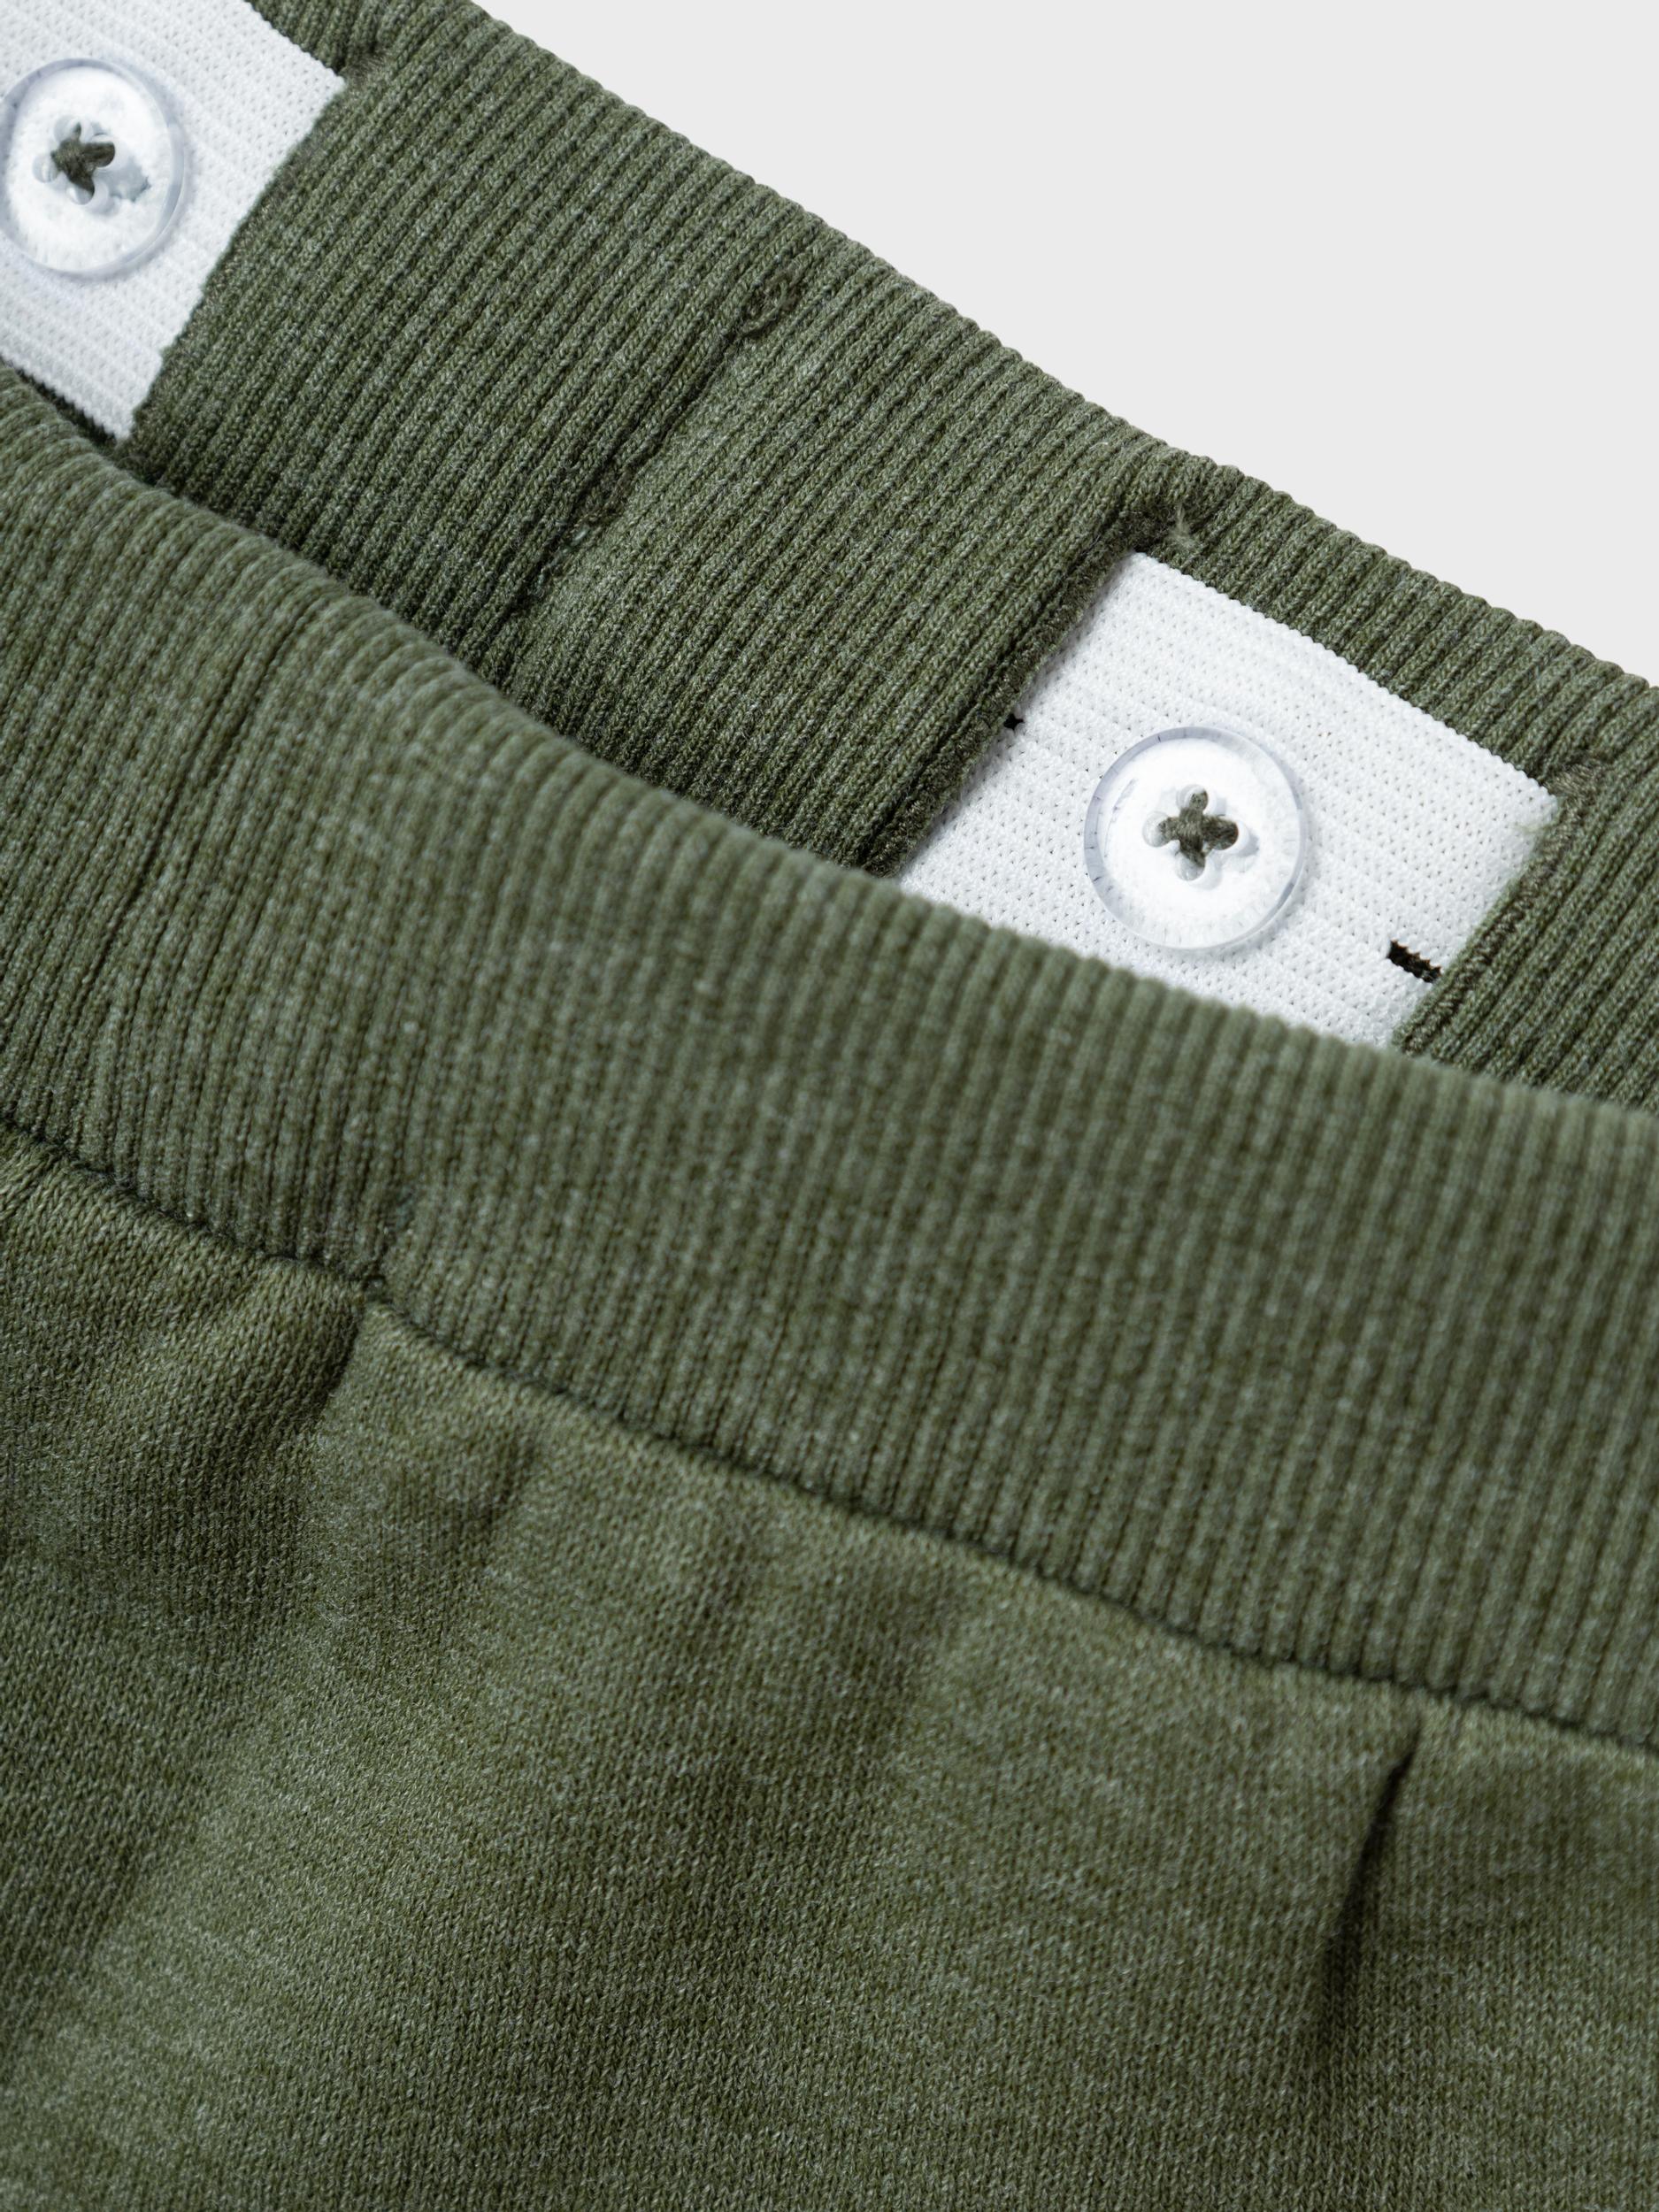 Boy's Nulle Sweat Pant-Rifle Green-Close Up View